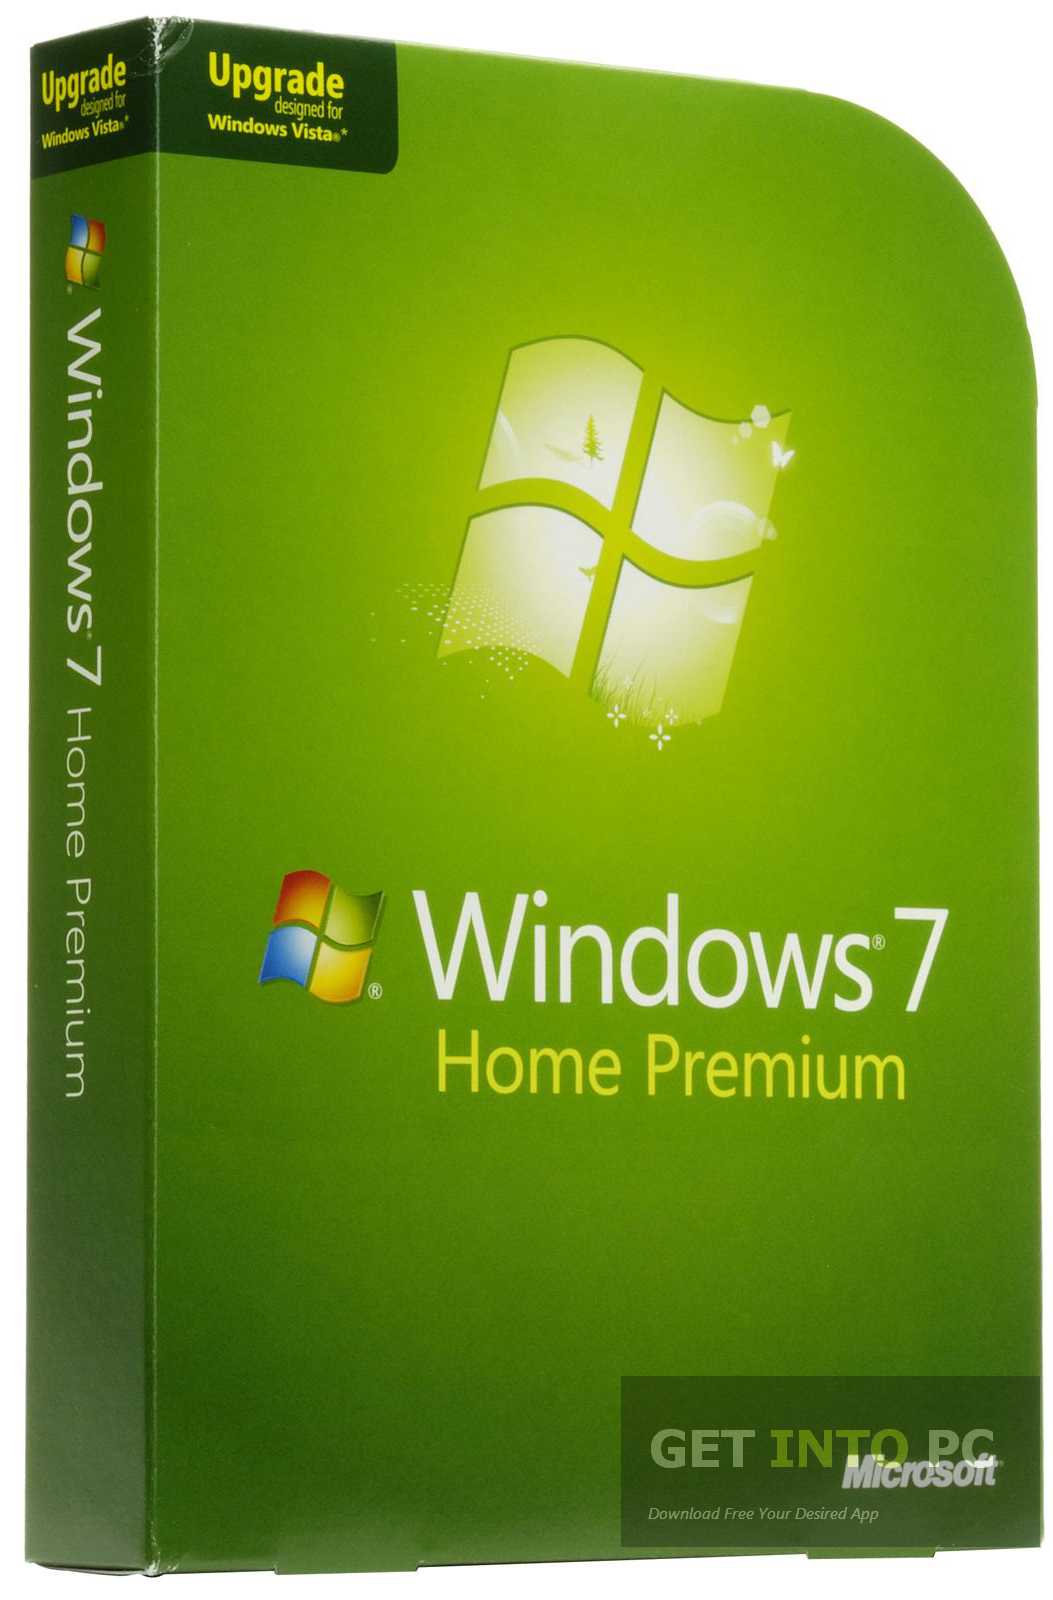 windows 7 iso image download for vmware